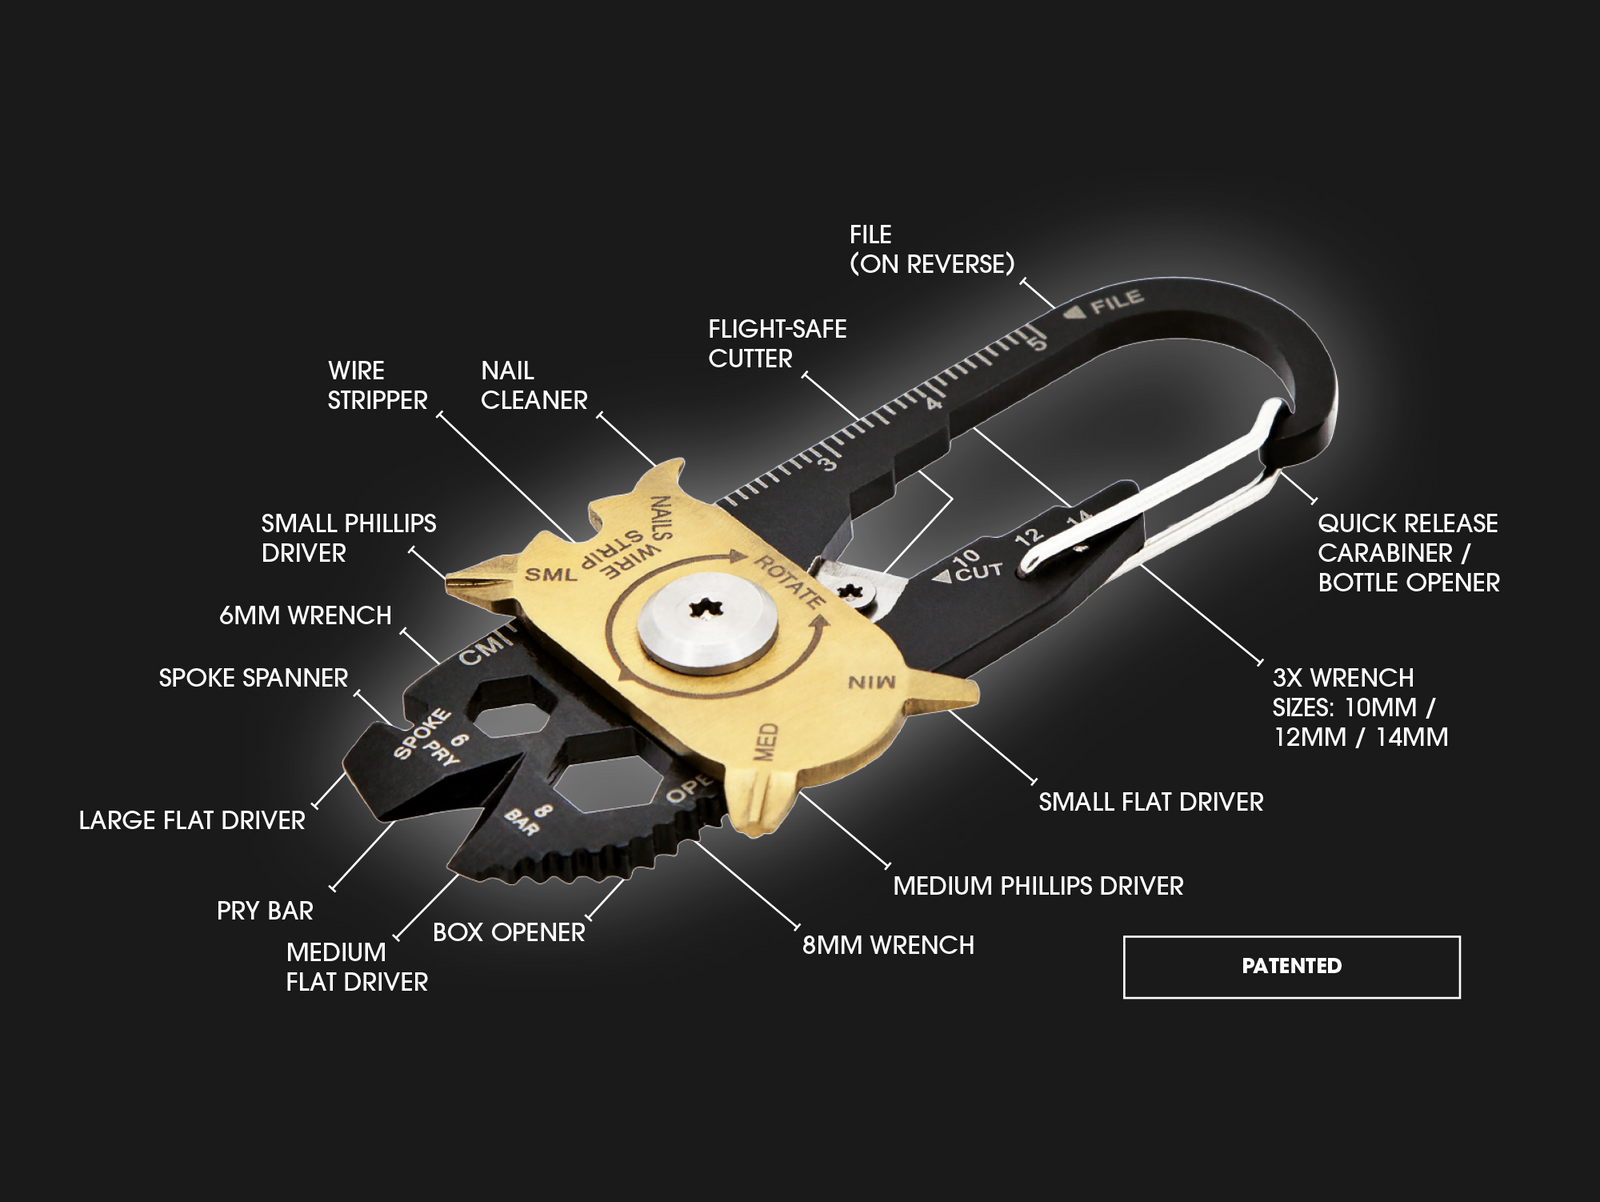 True Utility Fixr | Quick release, spoke spanner, wrench, drivers, nail cleaner, wire stripper, pry bar, bottle opener